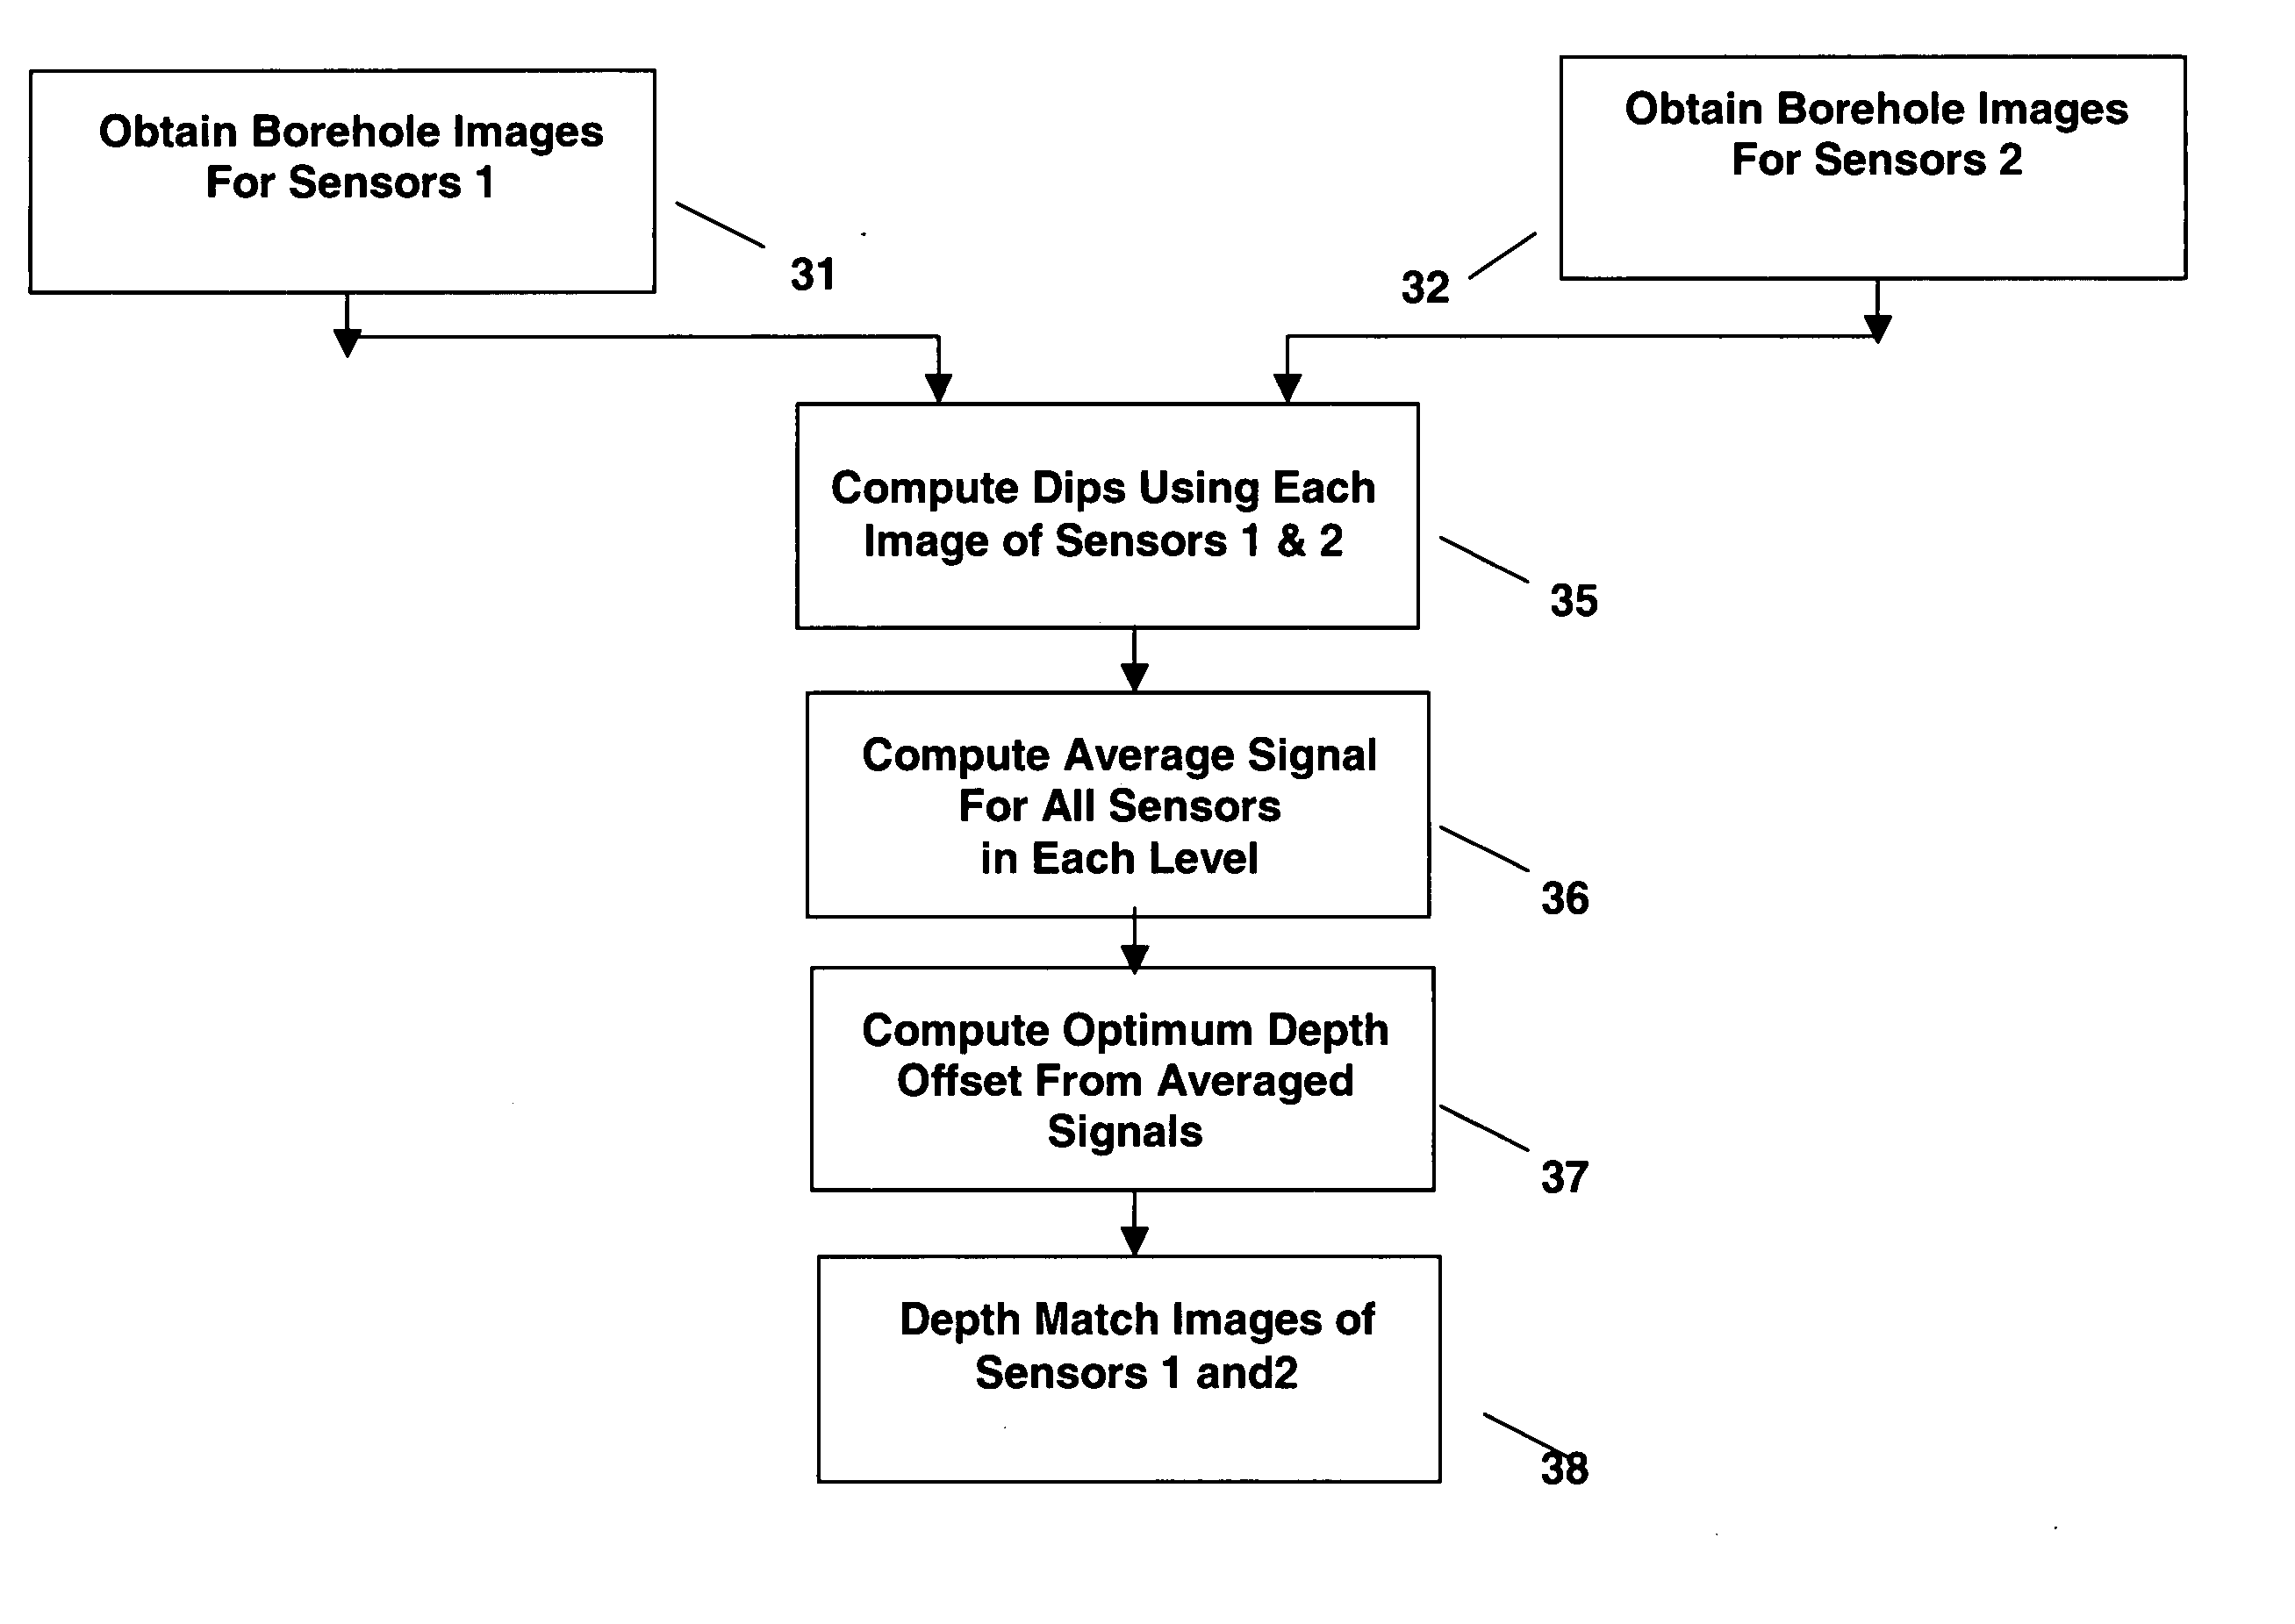 Method and apparatus for improved depth matching of borehole images or core images